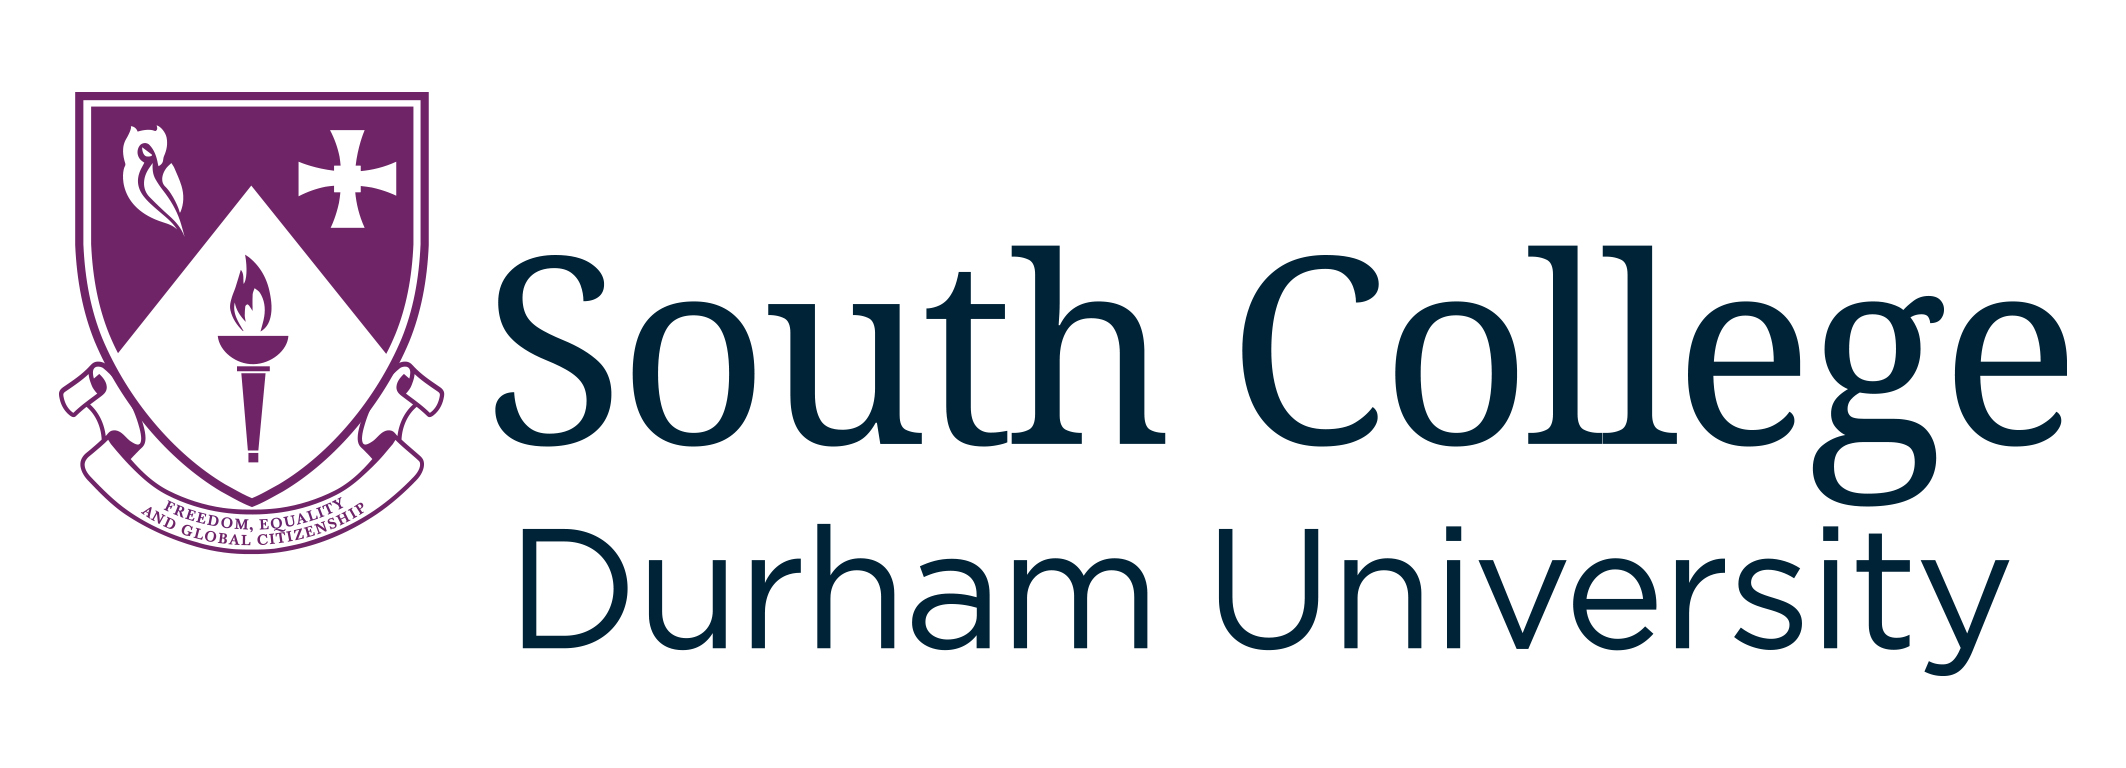 South College gown - JCR member